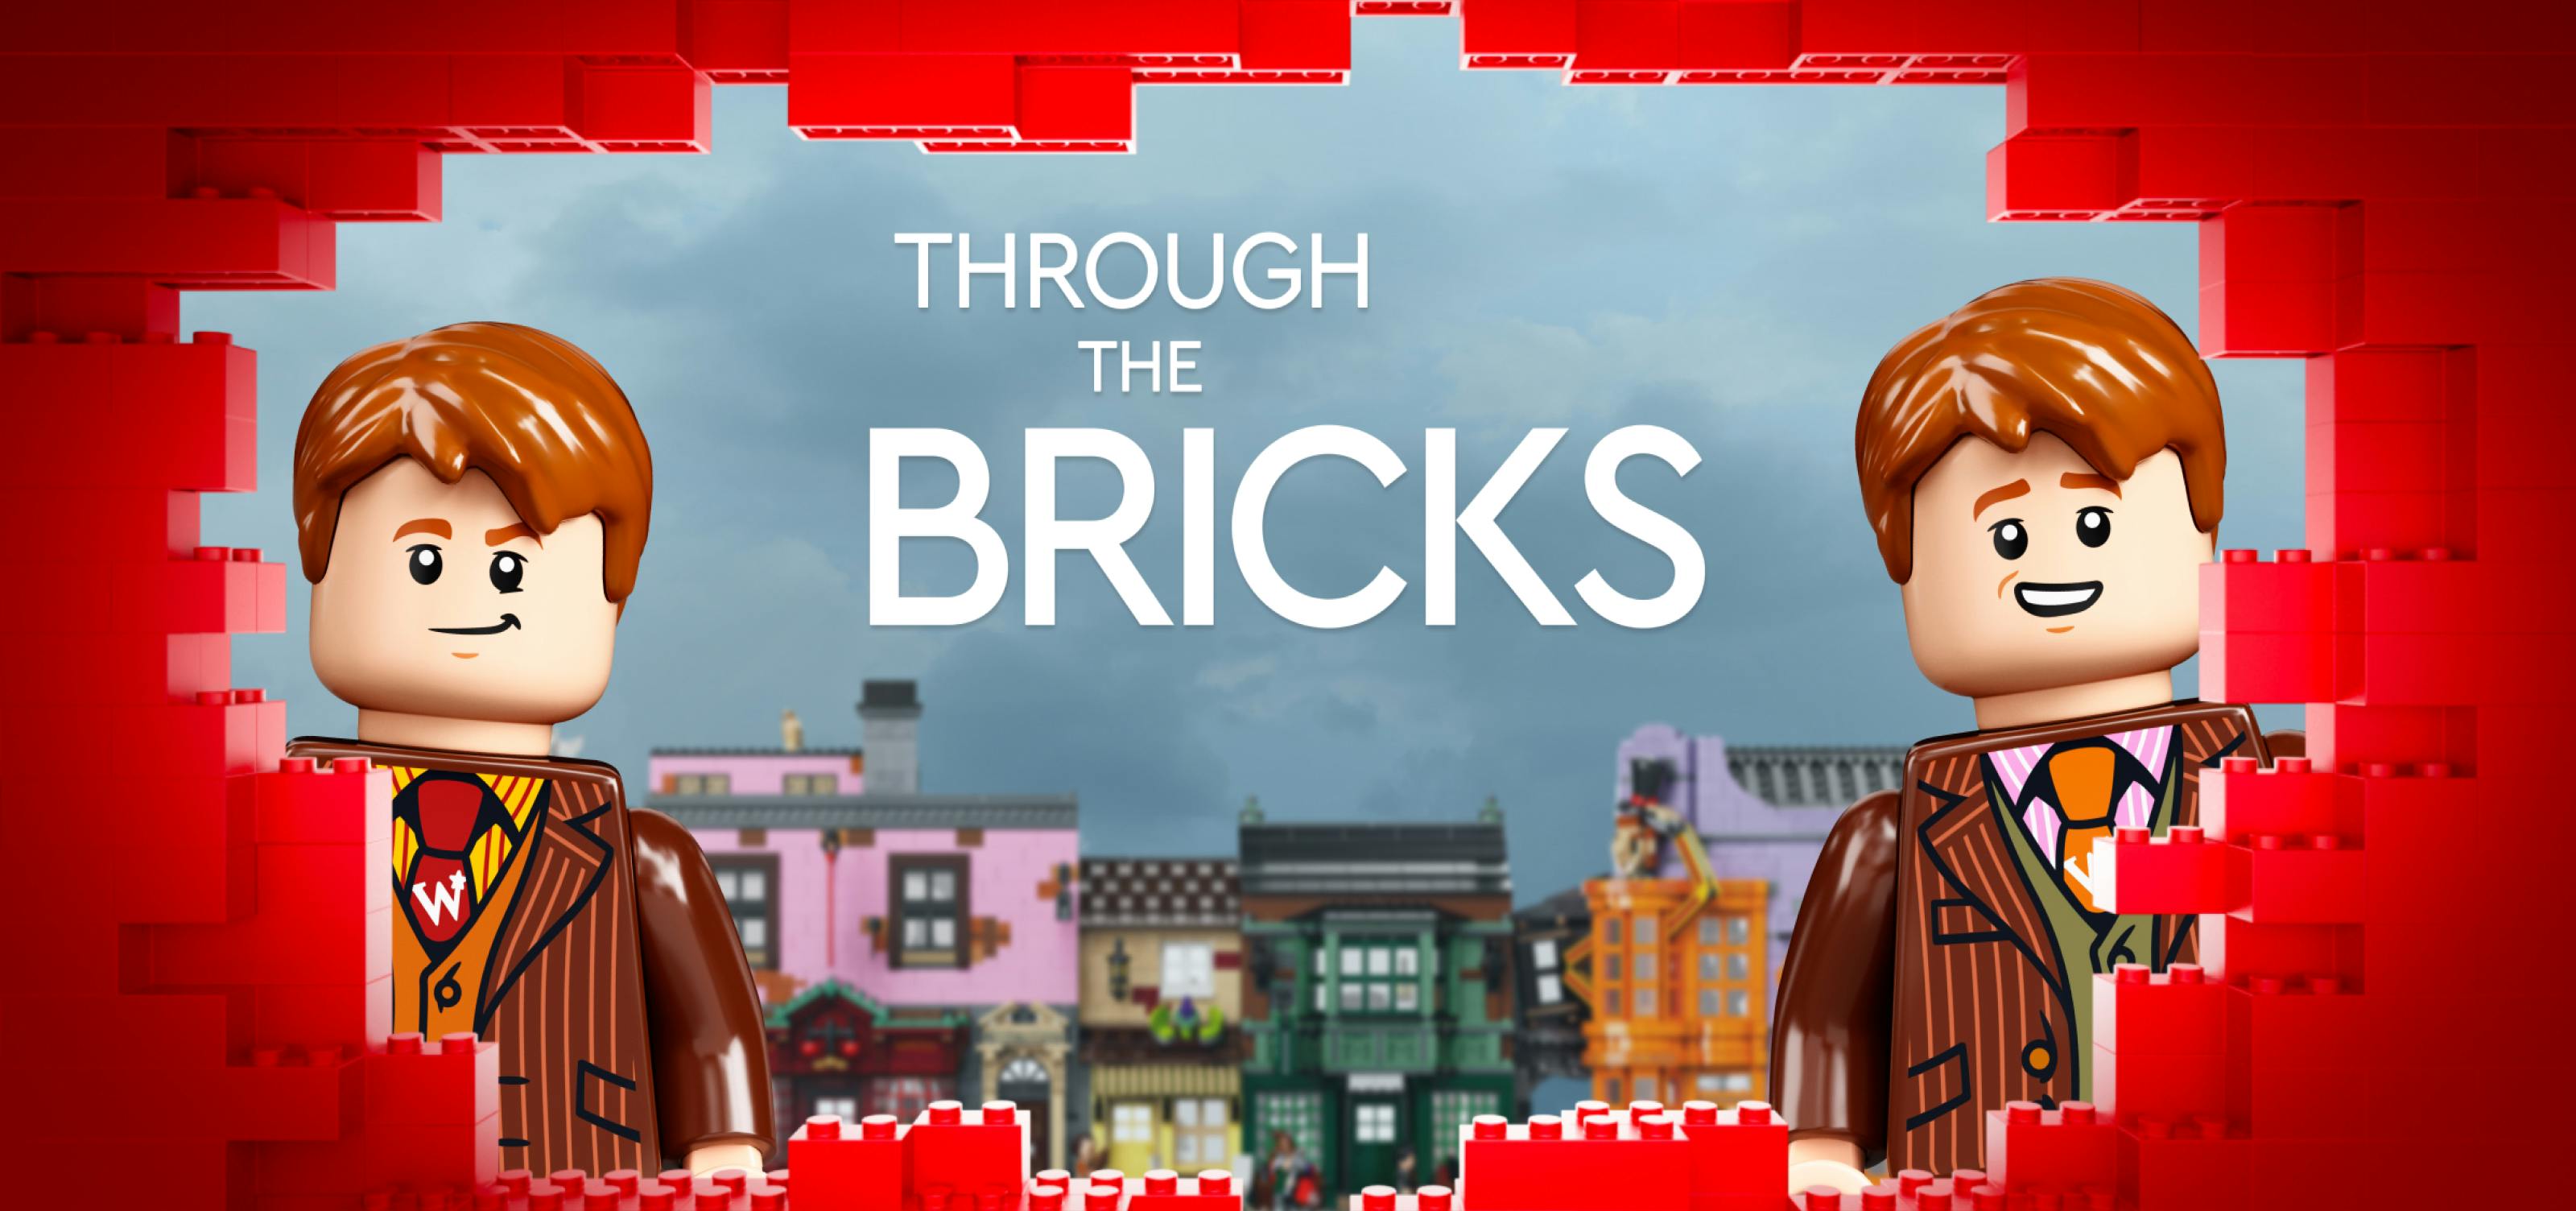 Enter Through the Bricks with the Weasley twins